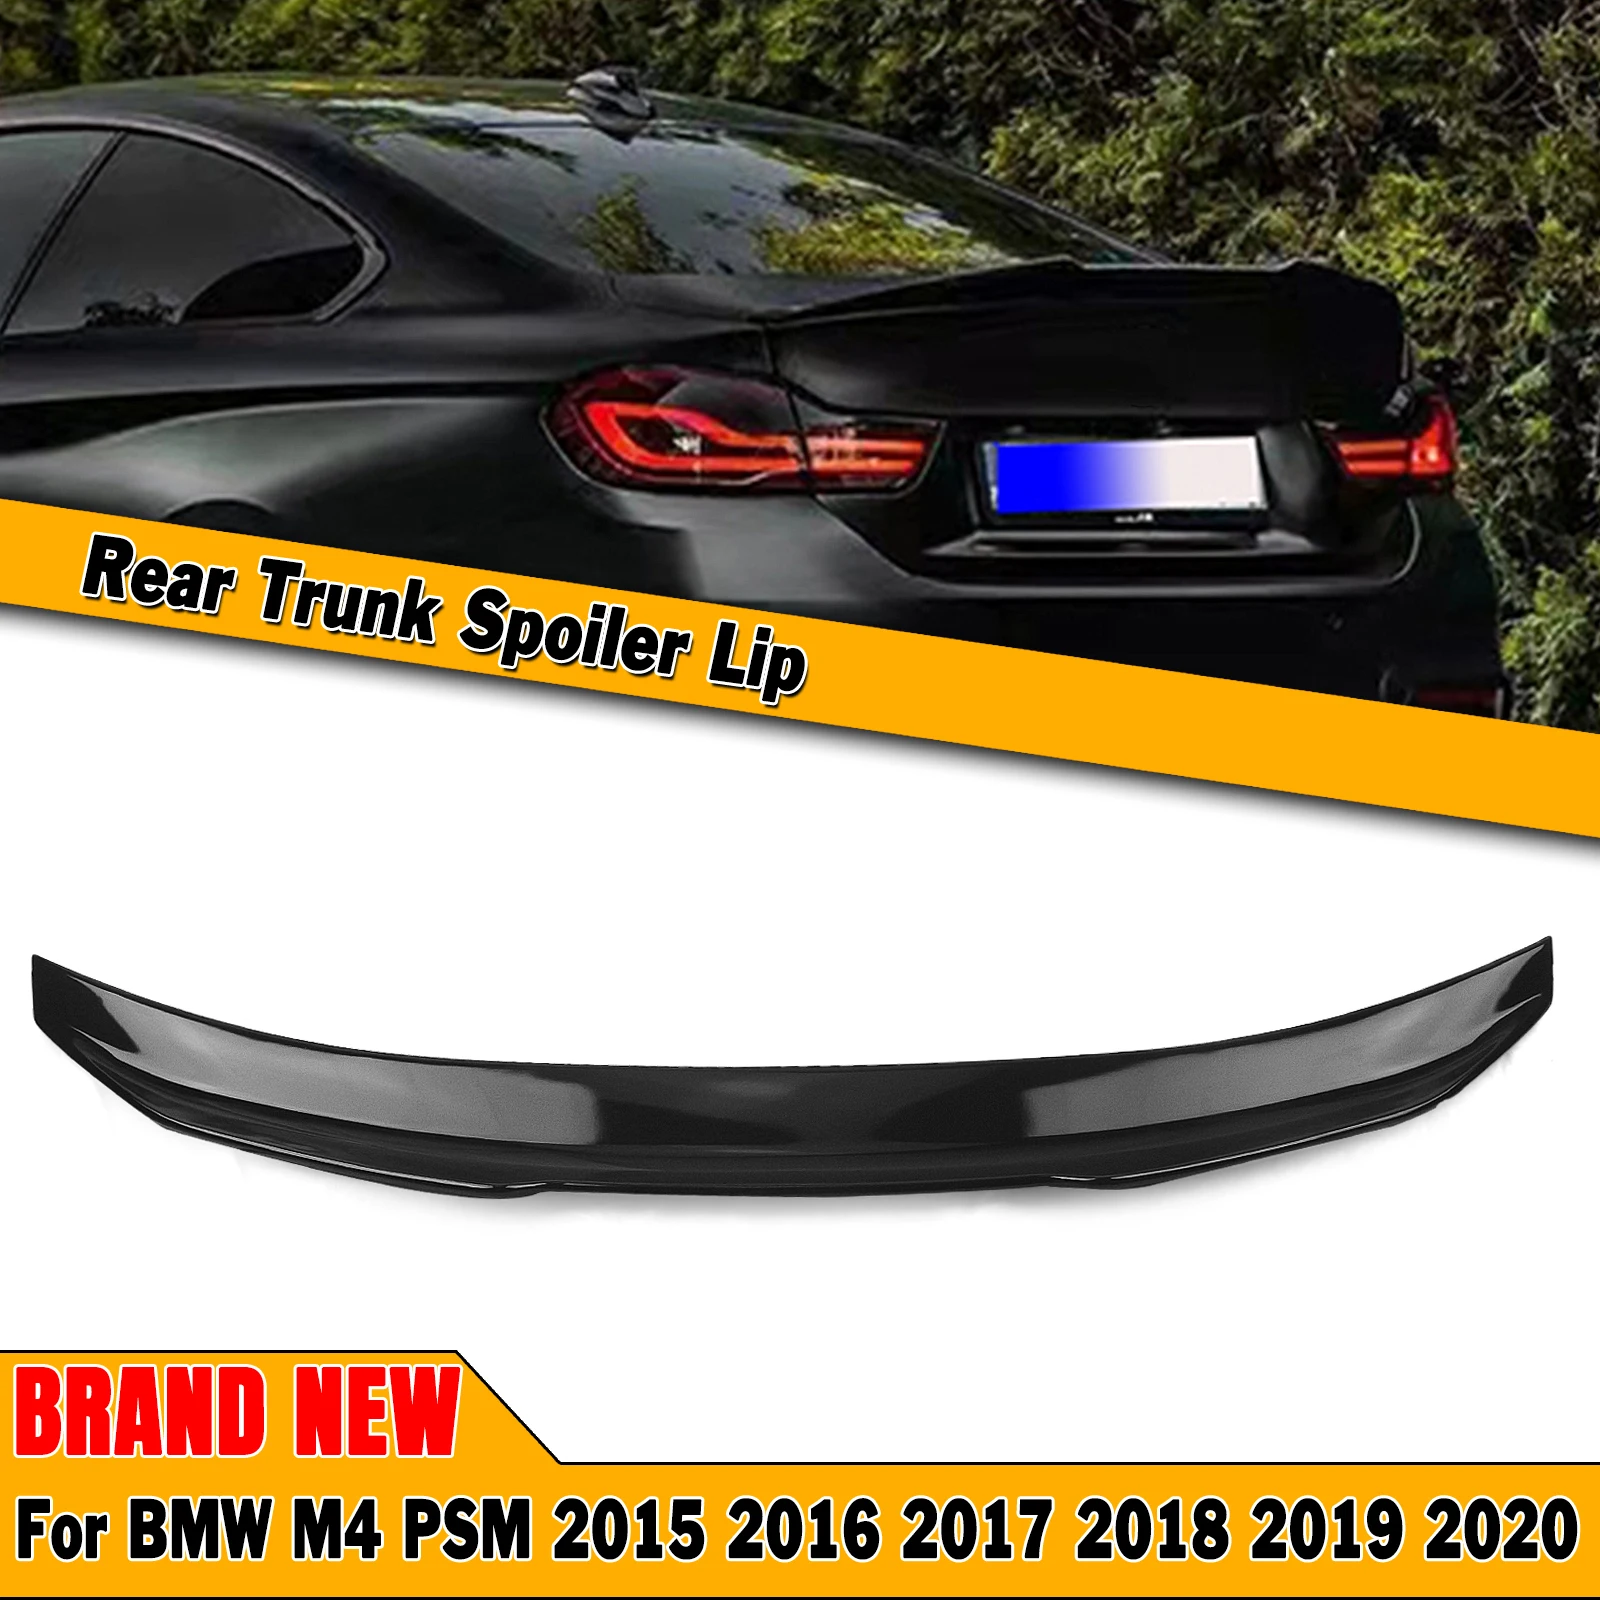 

M4 Rear Trunk Spoiler Wing For BMW F82 2015-2020 2 Door Coupe PSM Style High-Kick Glossy Black Car Tailgate Decklid Splitter Lip